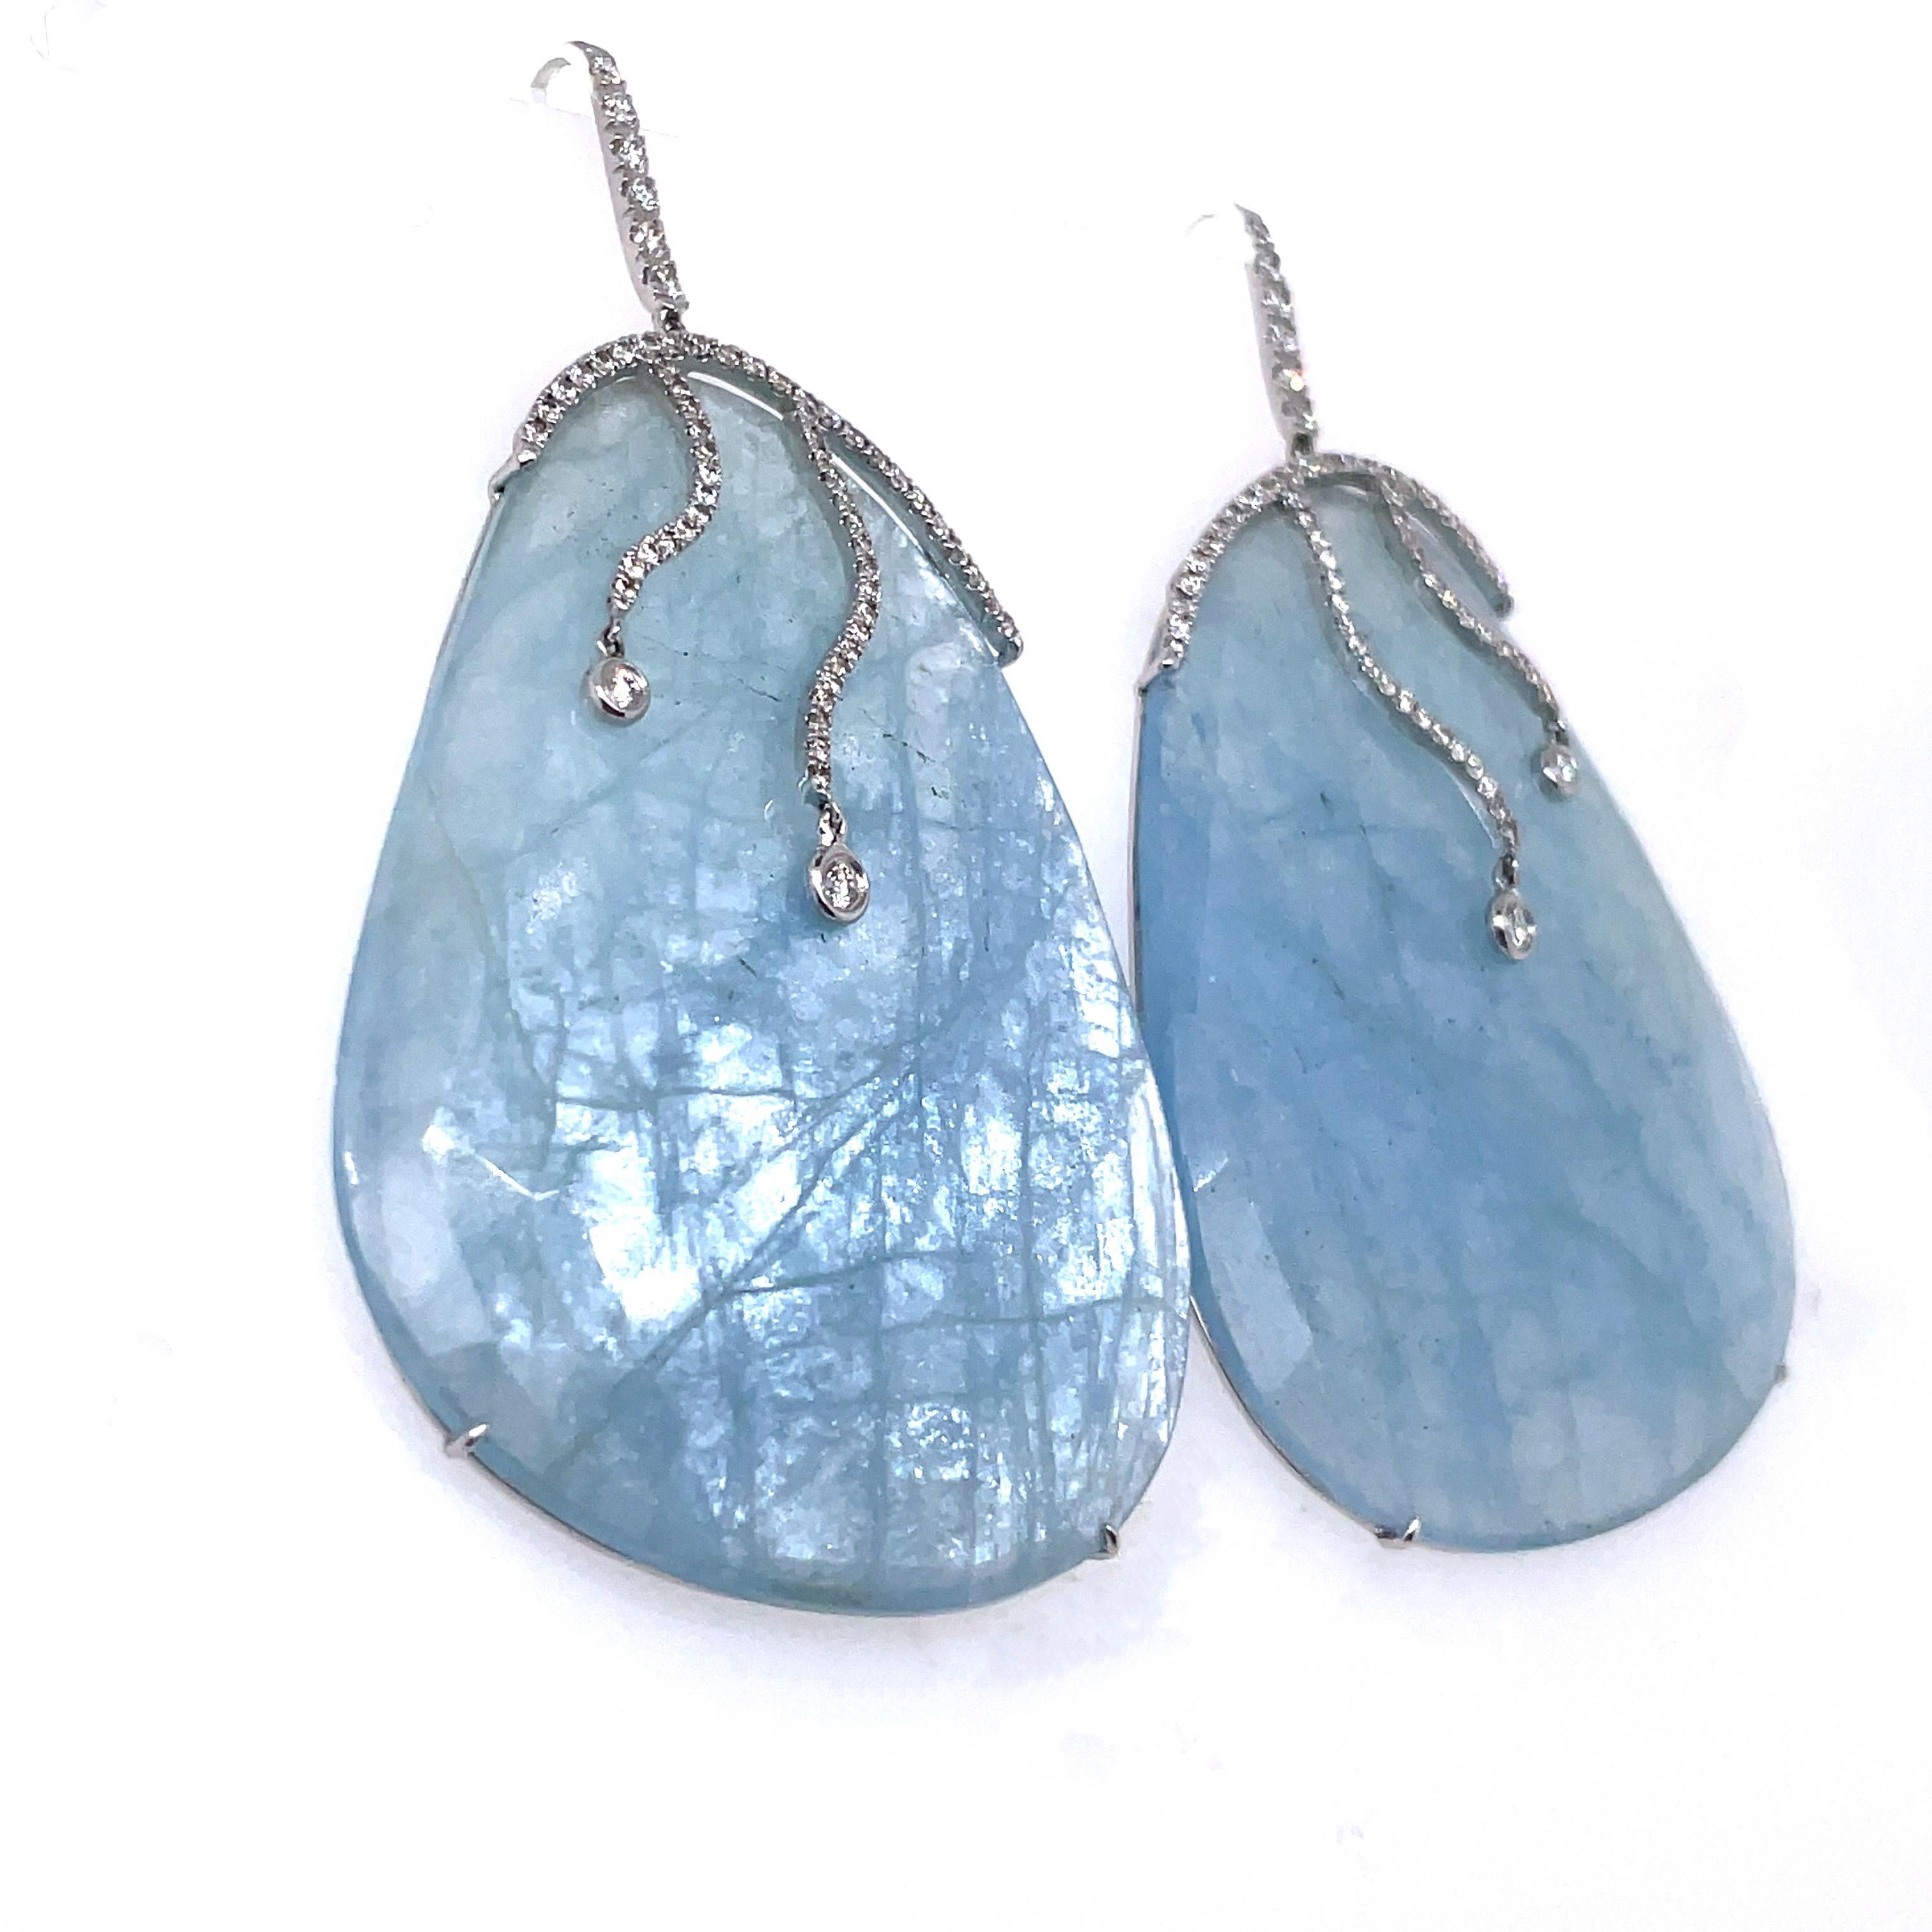 Like luscious fruits dangling from delicate stems, these earrings feature two mesmerizing rose cut aquamarine gems sourced from the depths of Brazil's mines, totaling an impressive 120.53 carats.

They are elegantly embraced by 124 round diamonds,